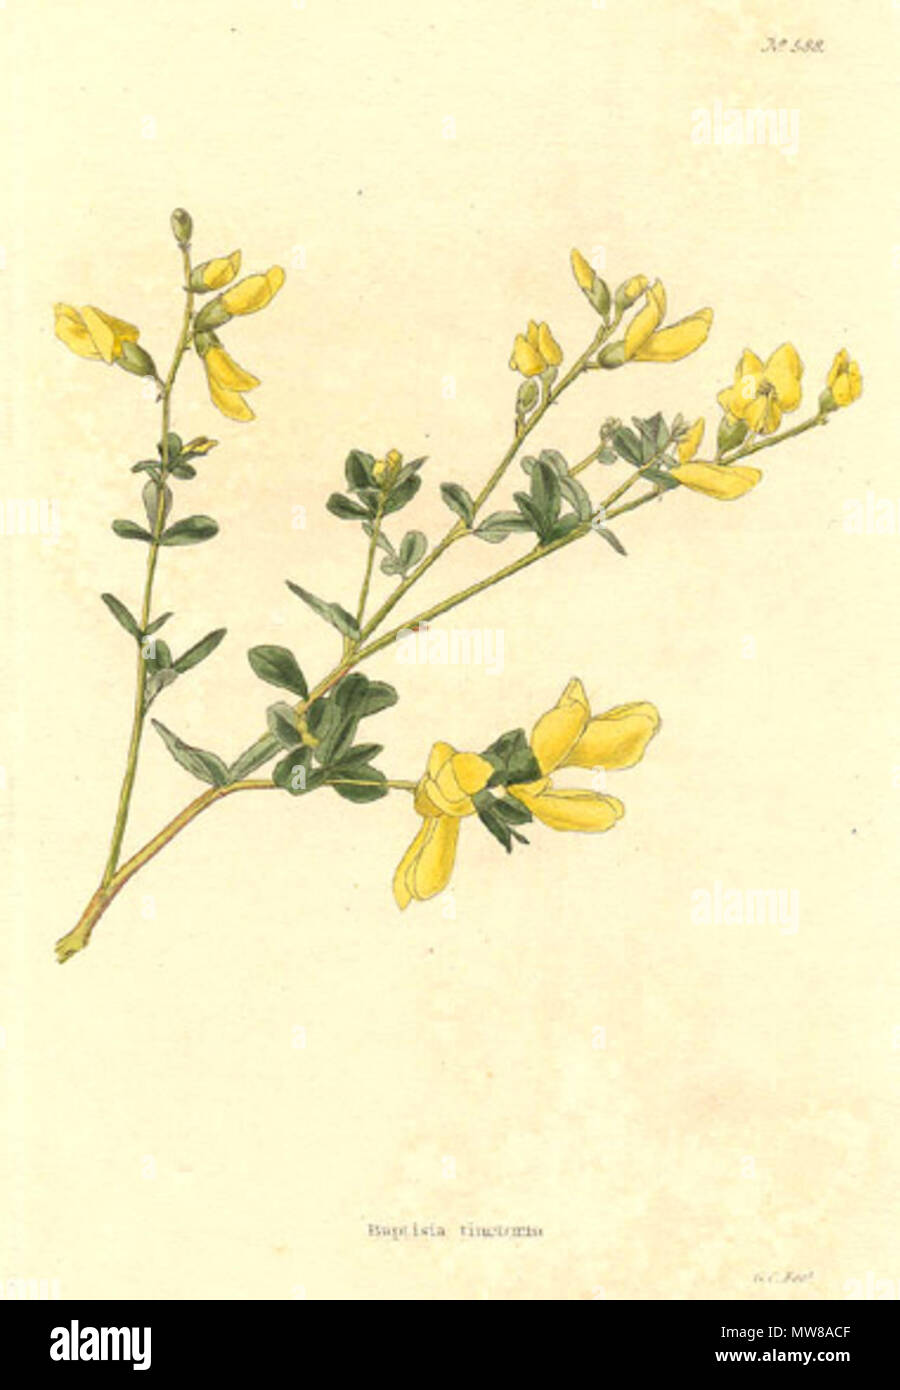 . Coloured engraving of Baptisia tinctoria wild indigo, a legume. 1822. engraving by George Cooke from drawings by George Loddiges, William Loddiges and others. 71 Baptisia-tinctoria-Conrad-Loddiges-1822 Stock Photo